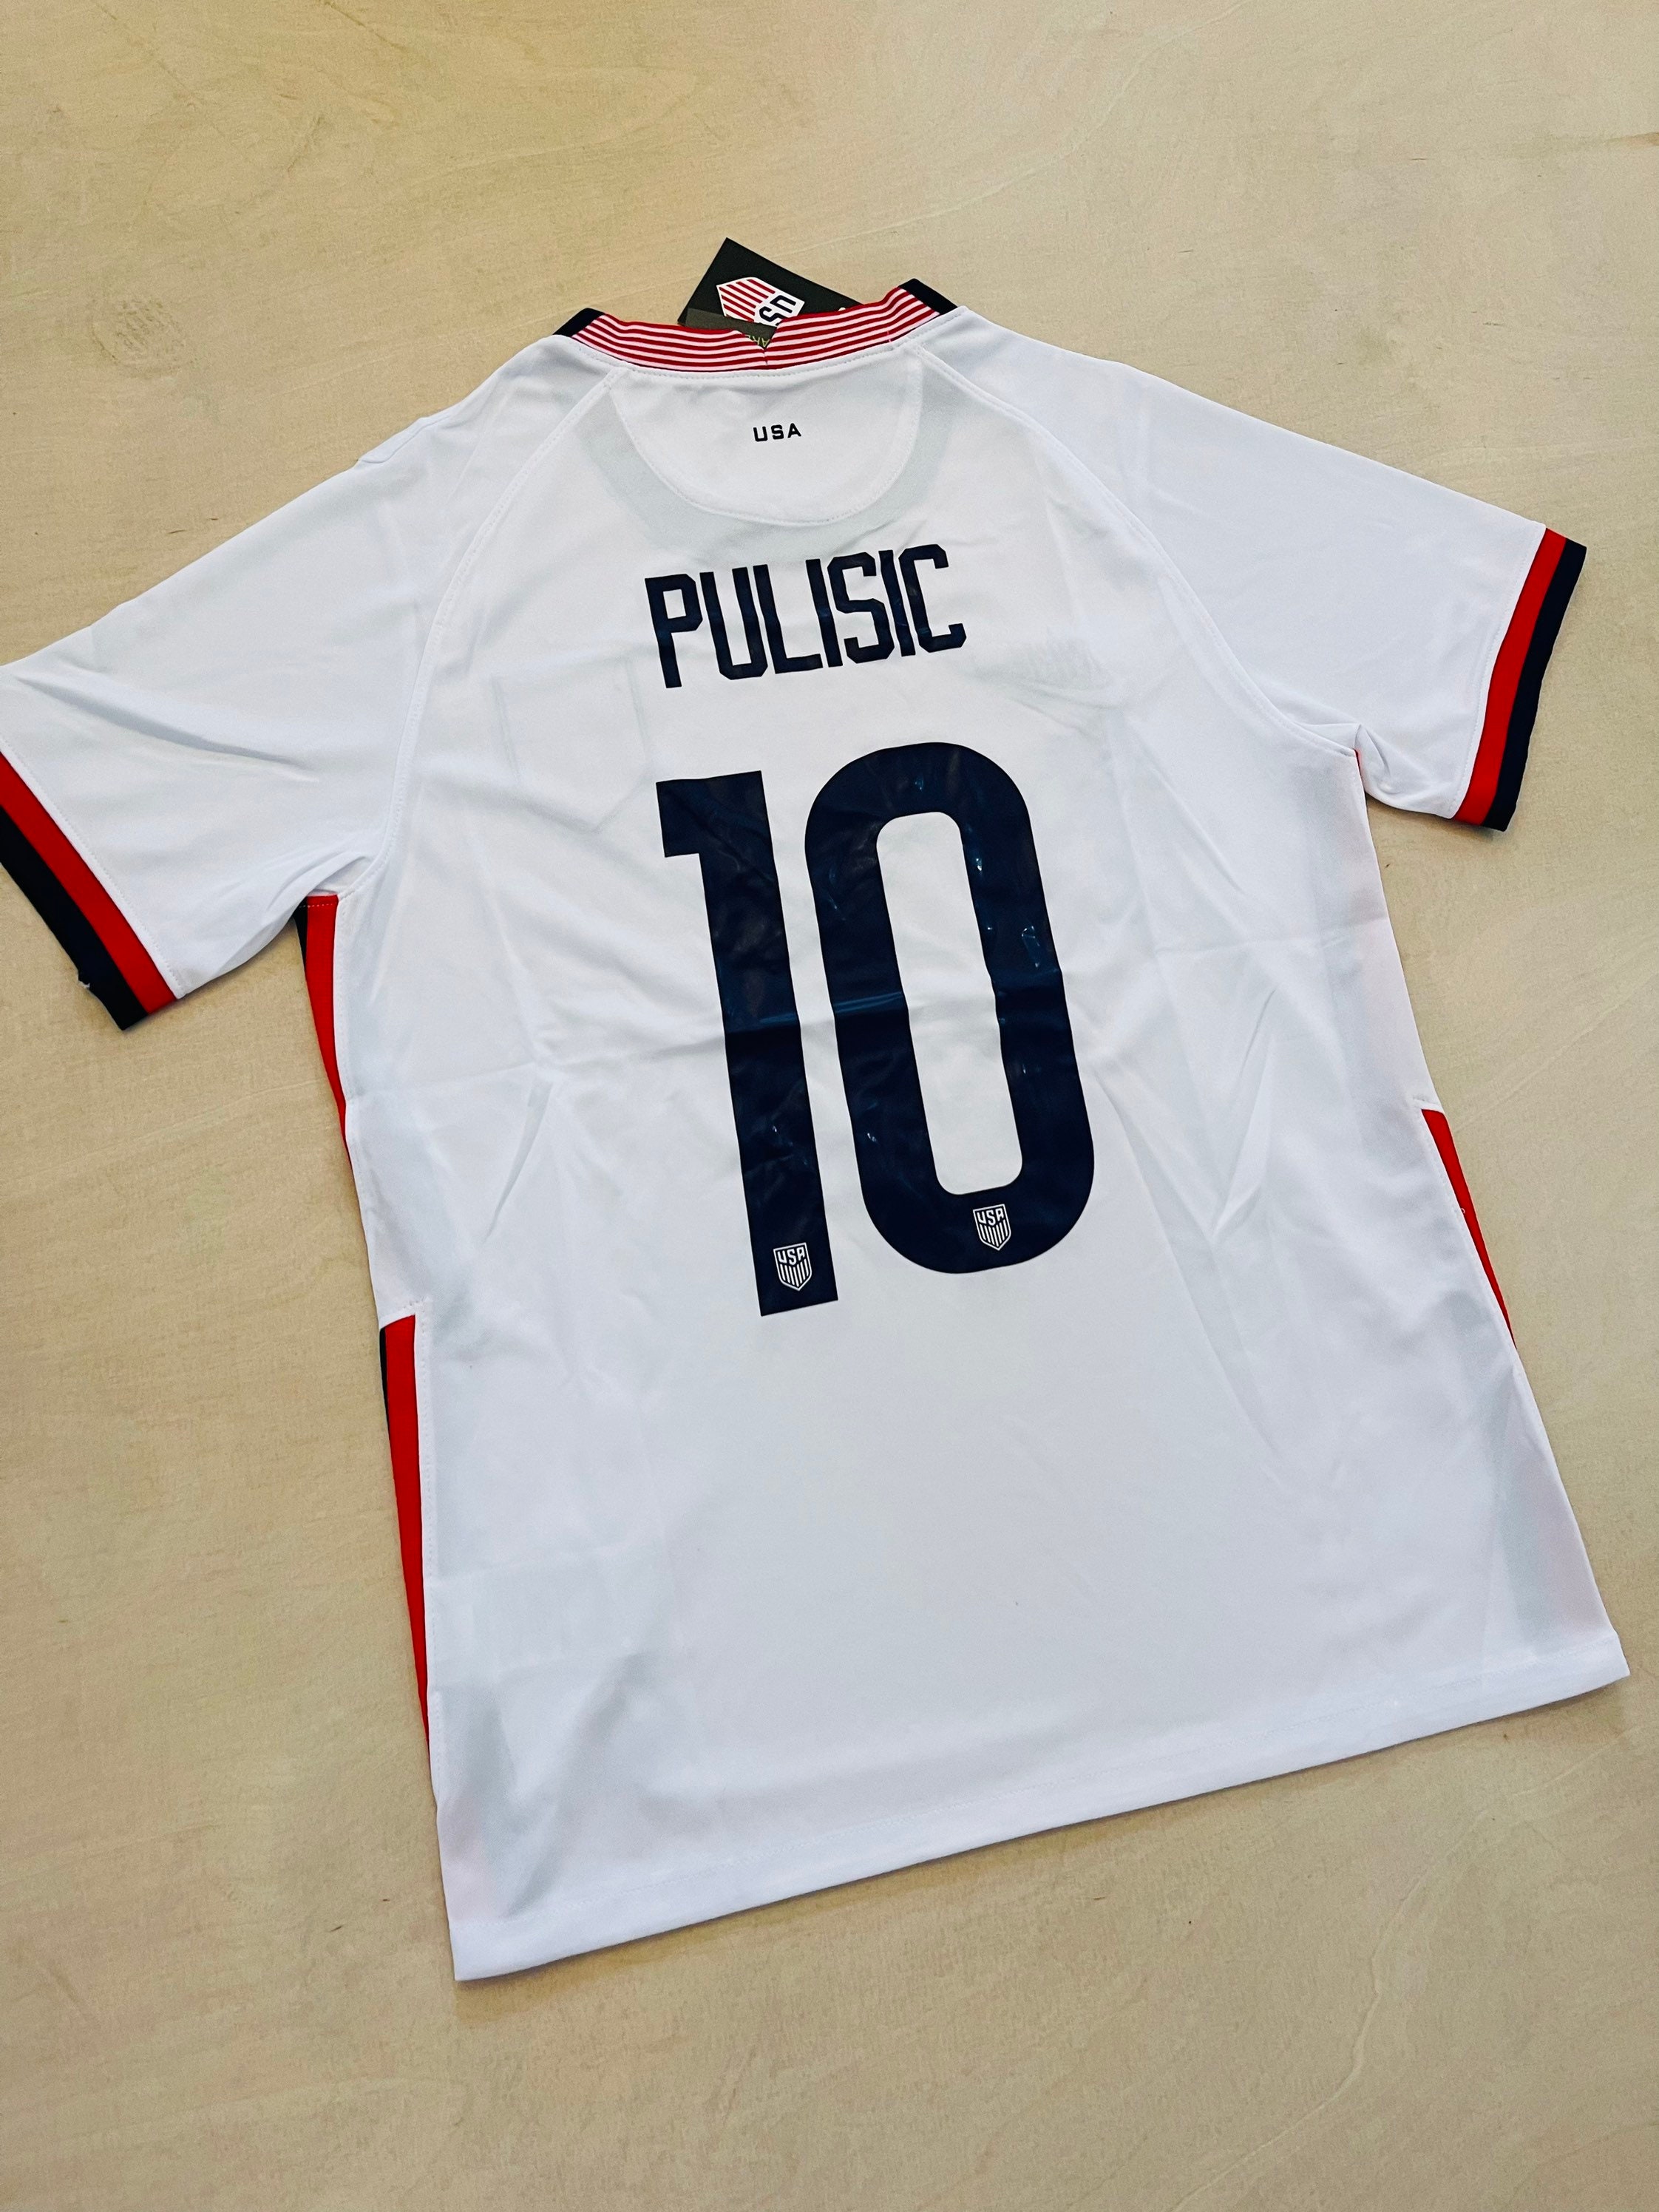 Pulisic 10 USA Home soccer jersey 20/21 | Etsy